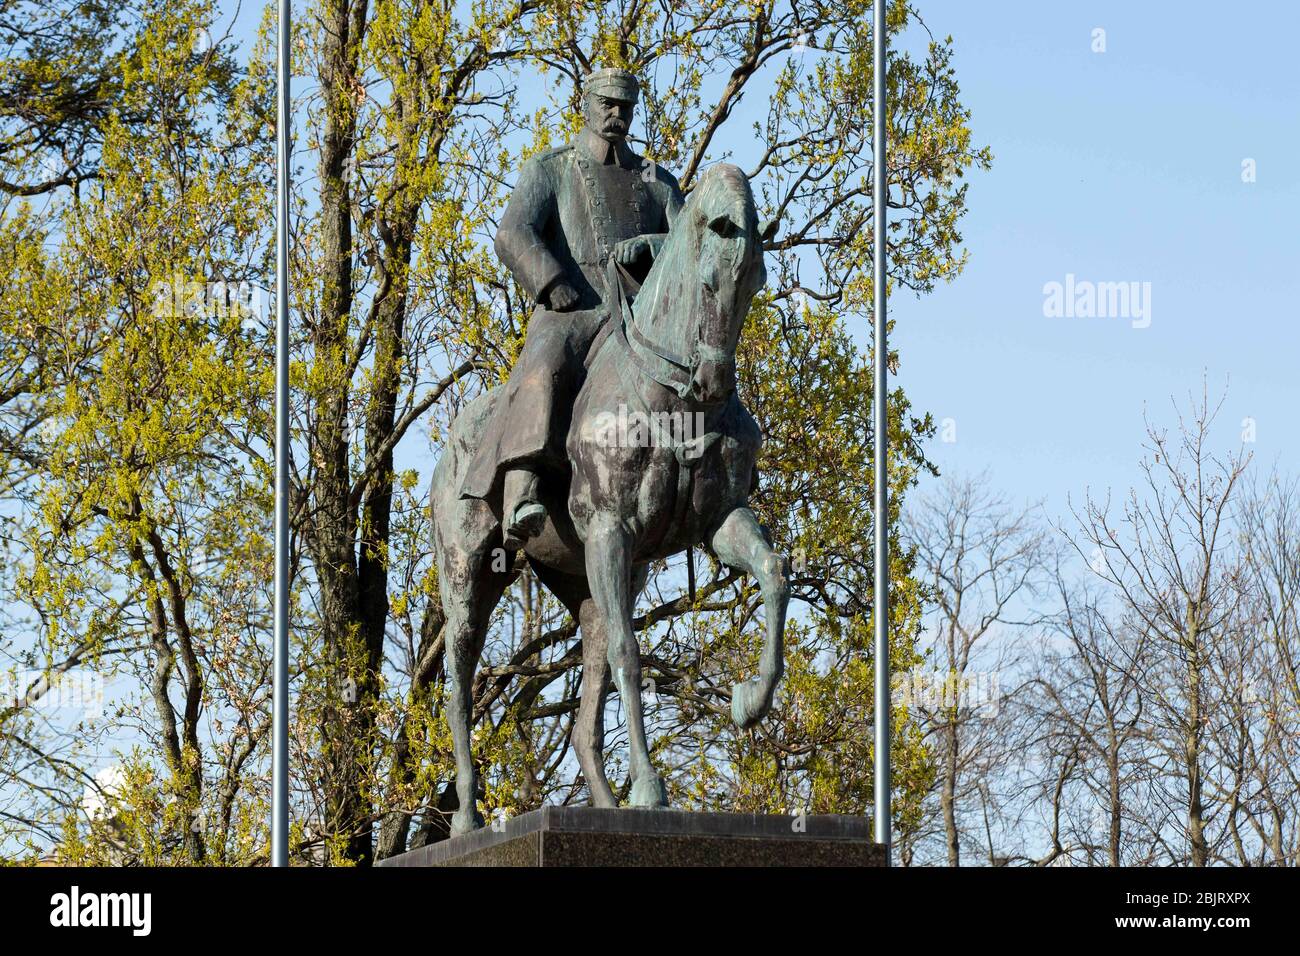 Lublin, Poland. 17th Apr, 2020. View of the Jozef Pilsudski Monument at the Plac Litewski (Litewski Square) during the Coronavirus (COVID-19) lockdown crisis.Due to coronavirus restrictions on movement, bars and restaurants are closed and the streets of Polish cities are depopulated. Credit: Karol Serewis/SOPA Images/ZUMA Wire/Alamy Live News Stock Photo